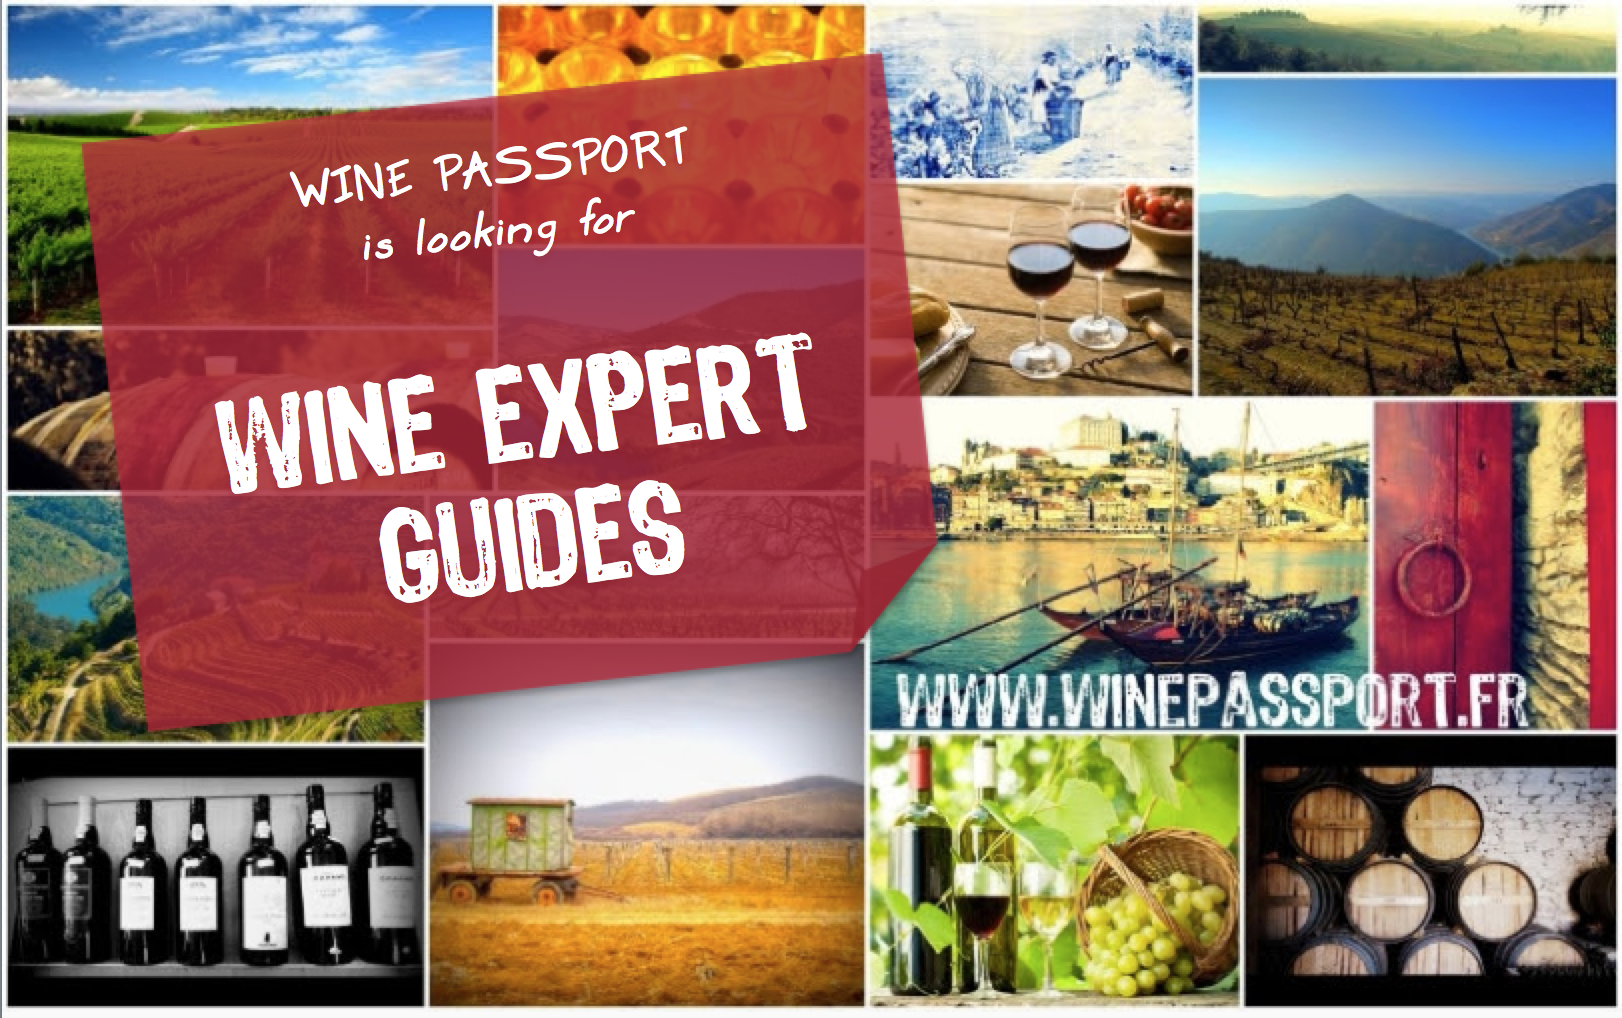 Wine Passport is looking for wine expert guides